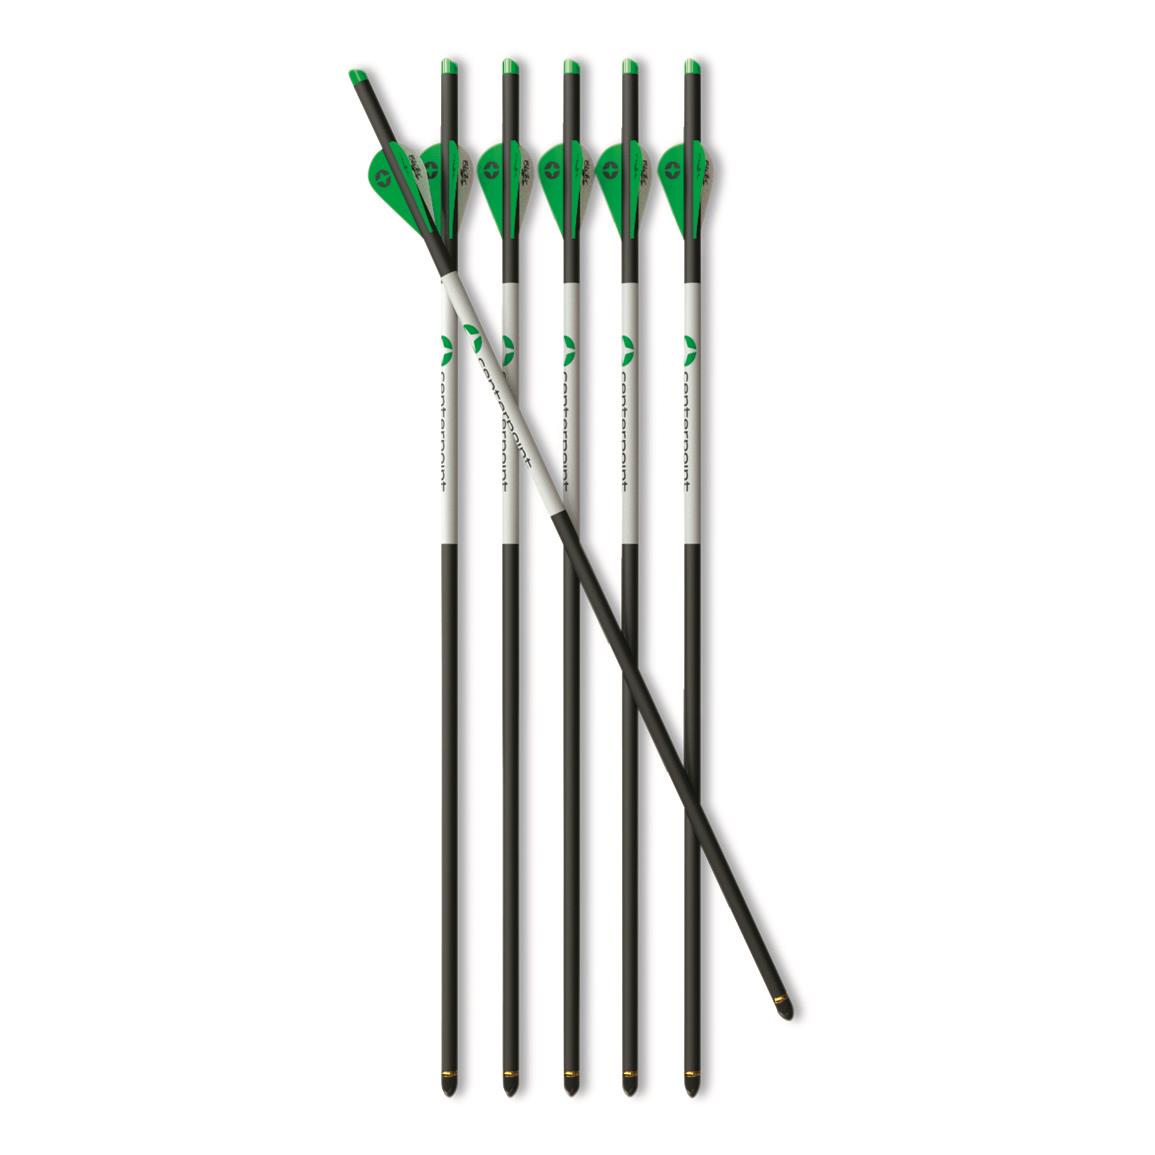 CenterPoint Carbon Crossbow Arrows, 400 Grain, 20 Inch, 6 Pack